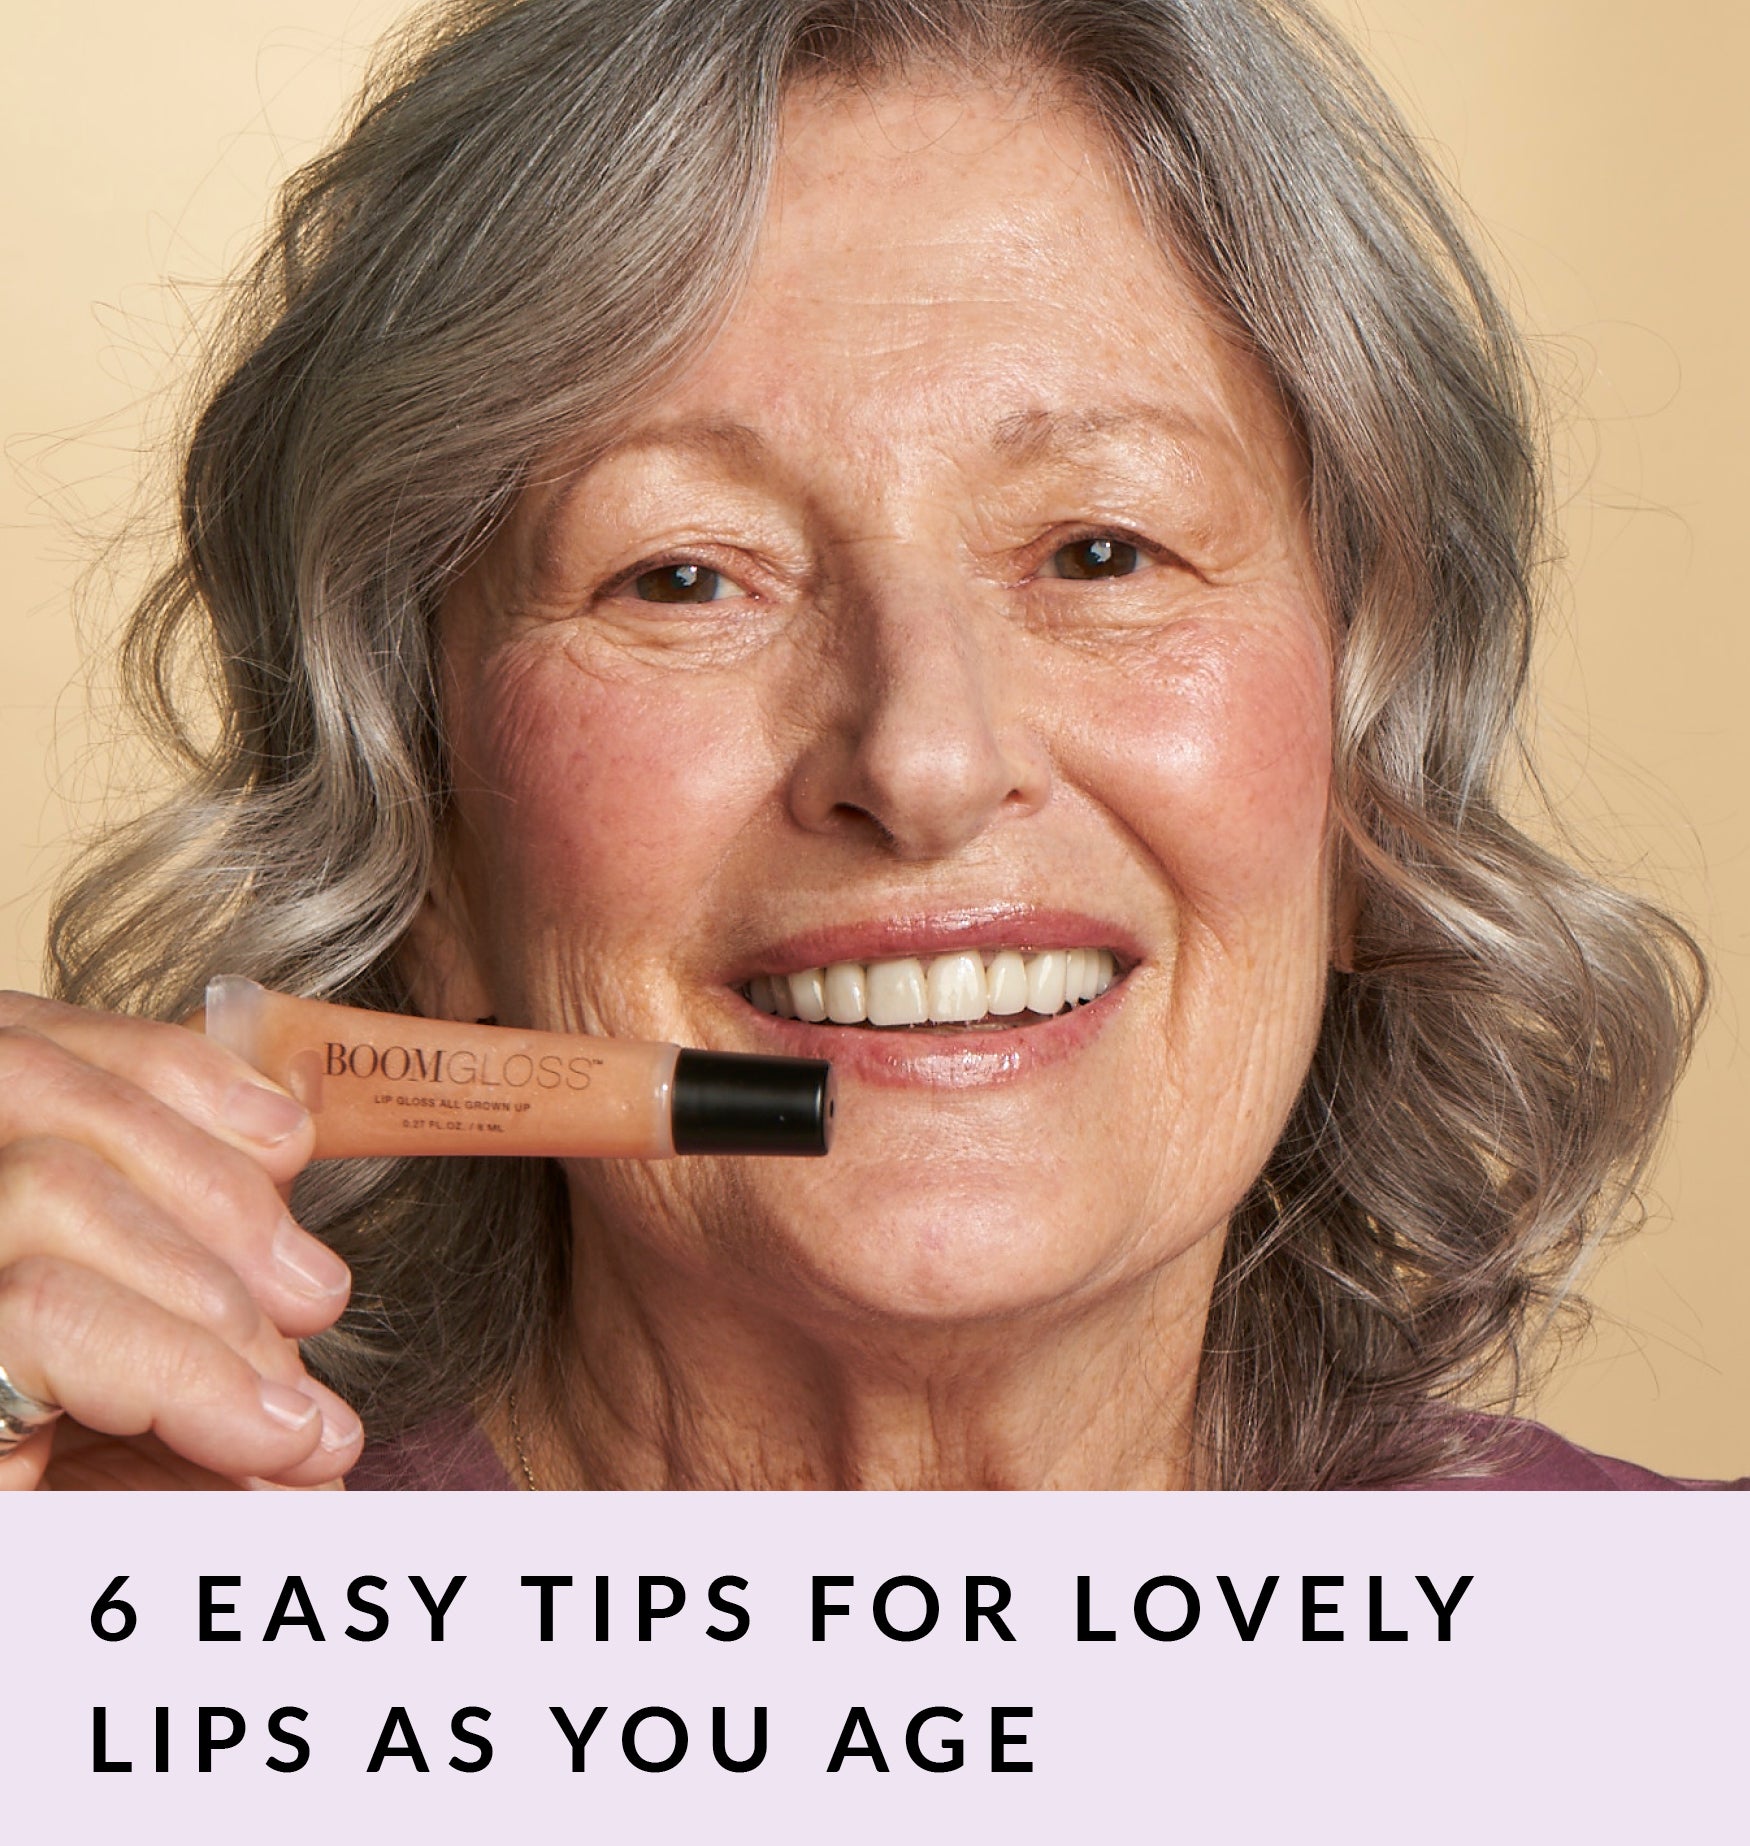 6 Easy Tips for Lovely Lips After 50